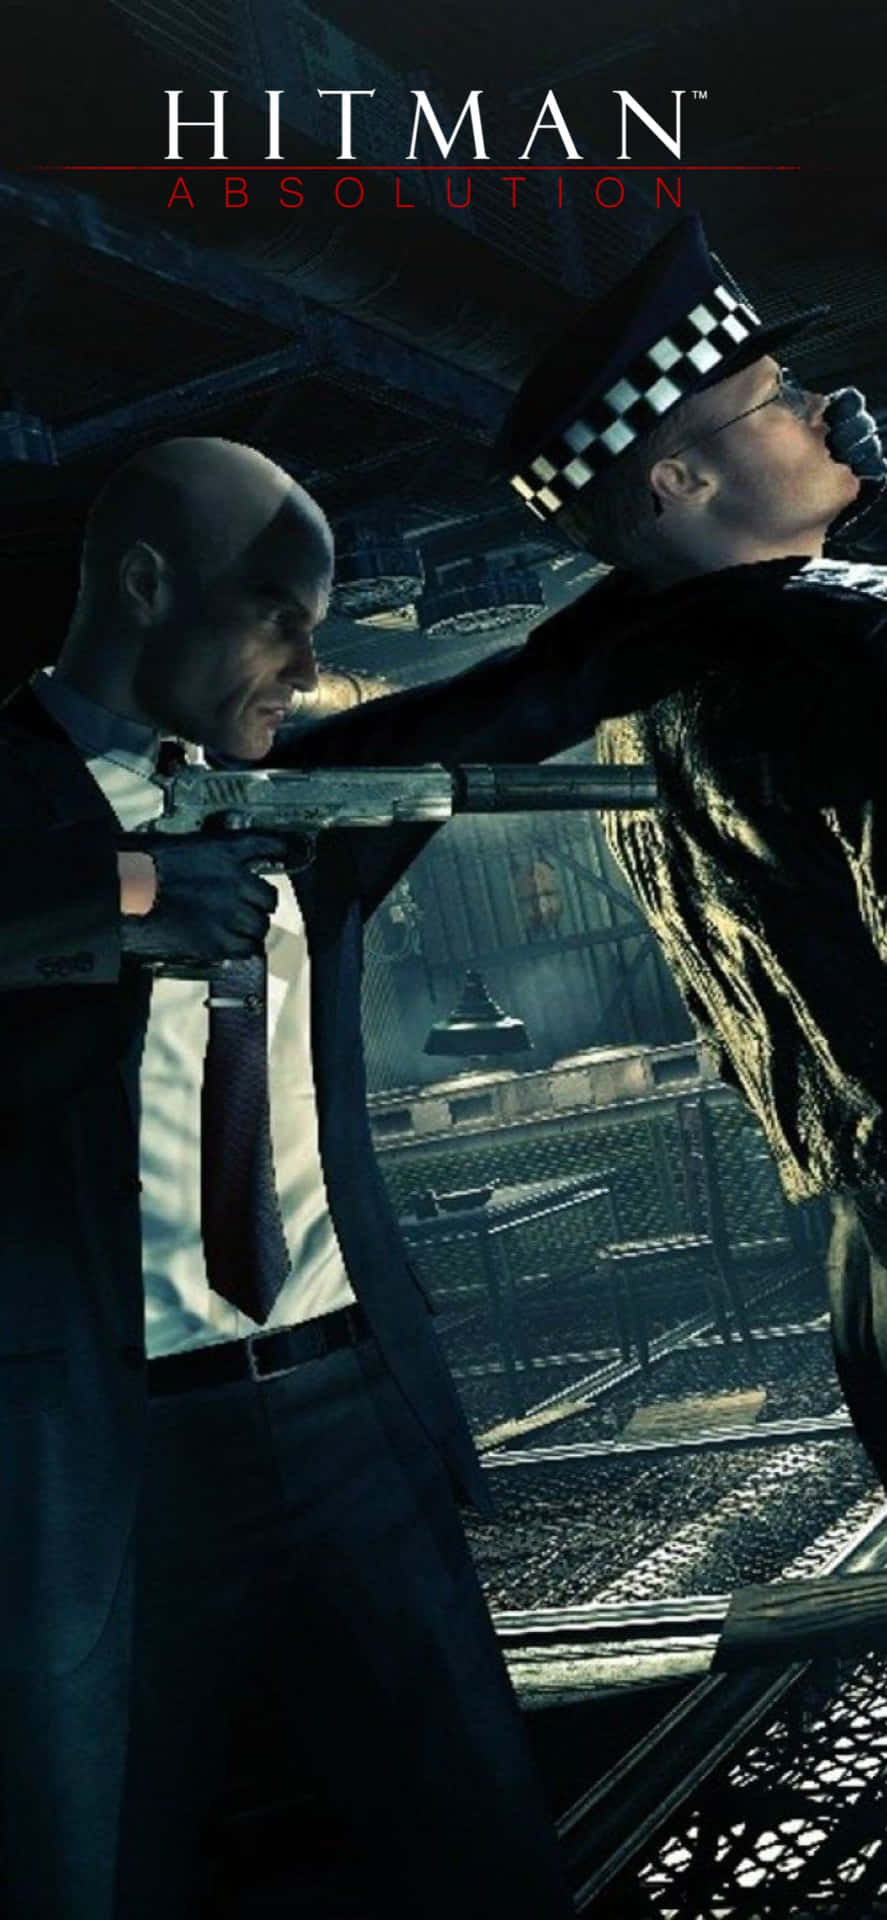 Iphone X Hitman Absolution Background 1125 X 2436